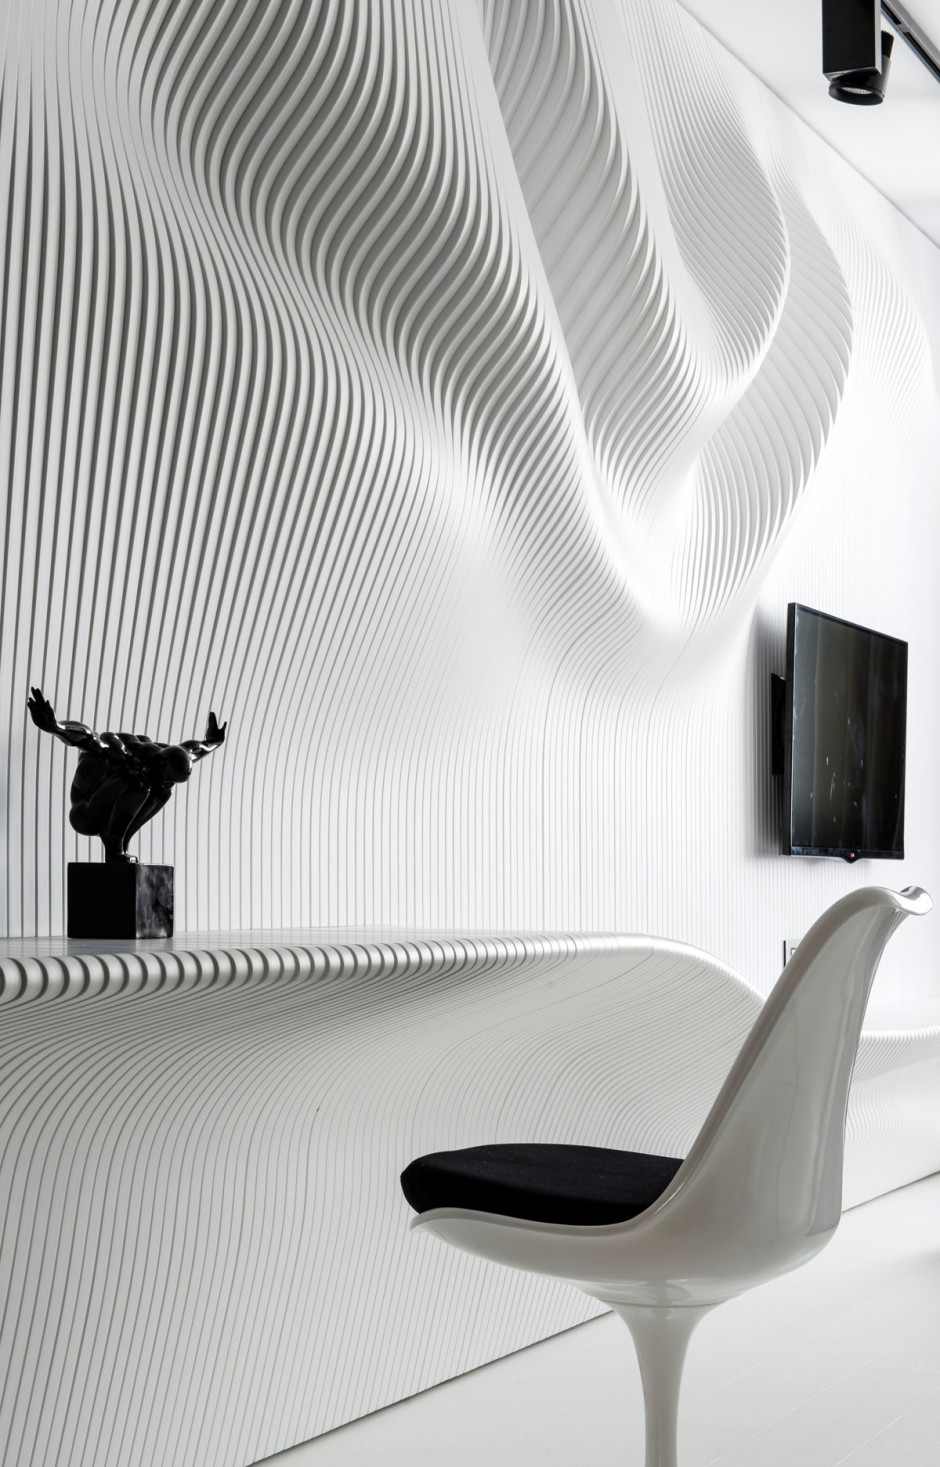 Bedroom Design With Enchanting Bedroom Design Futuristic Bedroom With White Colored Wooden Curvy Wall And Black Pendant Lamps Bedroom 10 Stunning Black And White Bedroom Ideas In Fall Color Accent